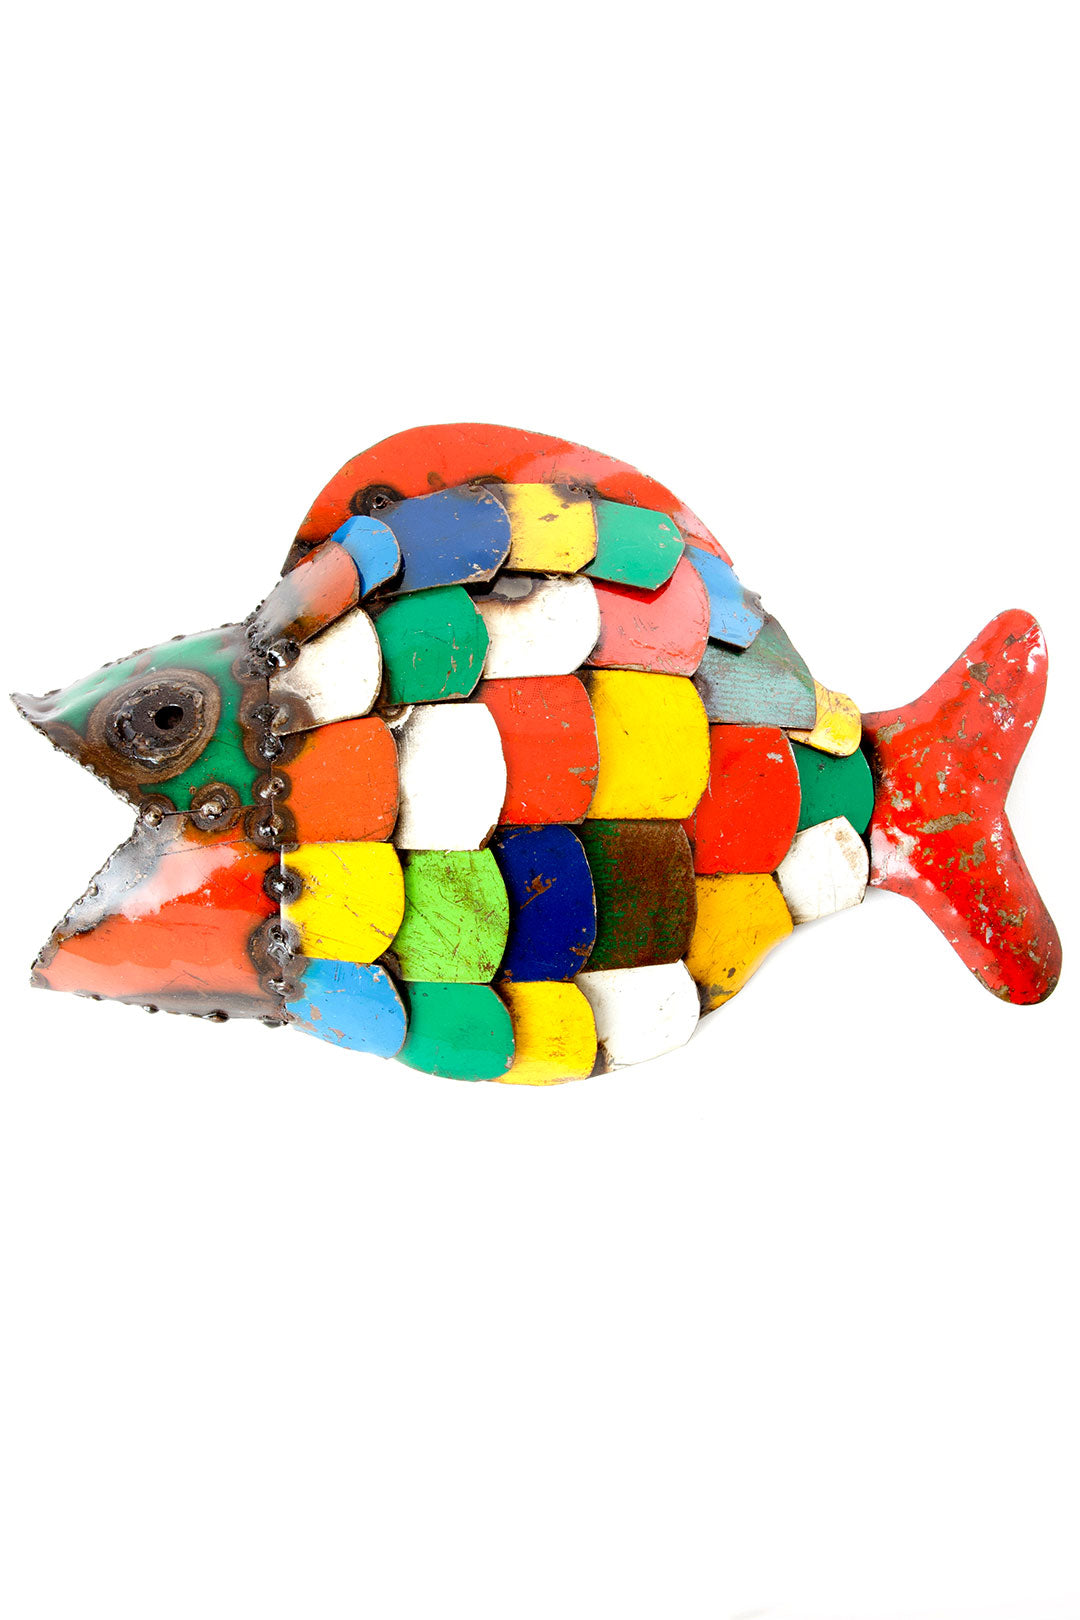 Colorful Recycled Metal Fish Wall Art Large Fish